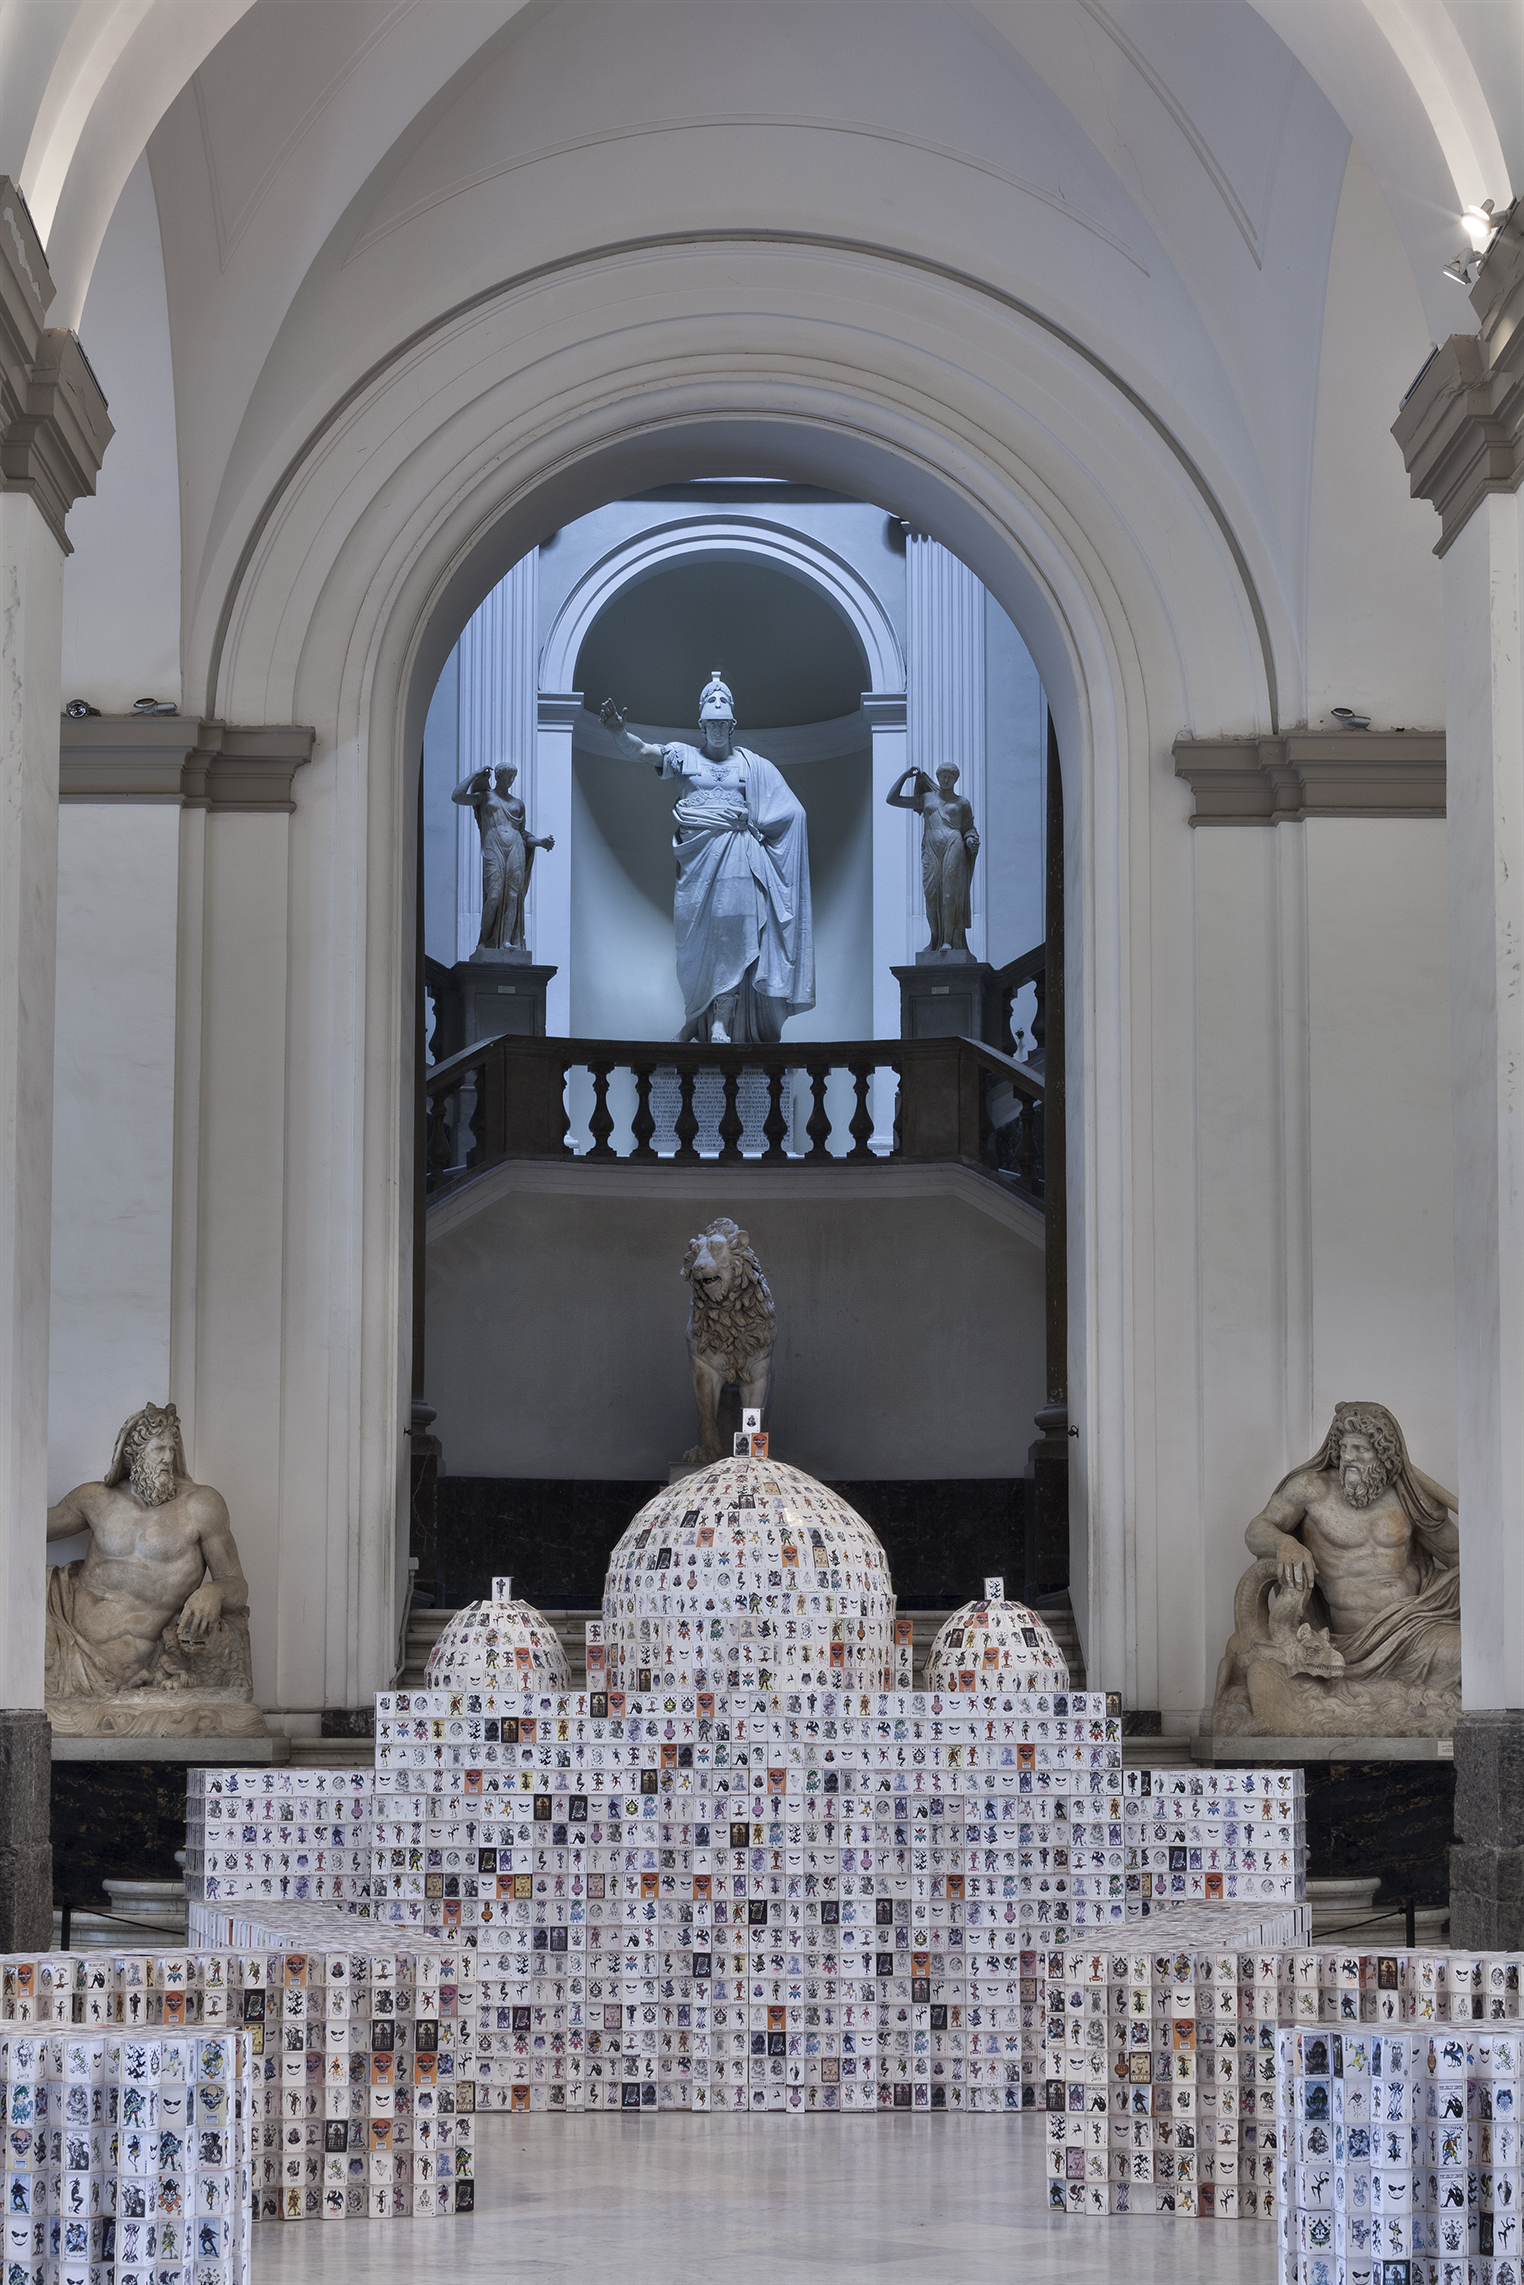    All Is Violent, All Is Bright , 2009 . MANN - Museo Archeologico Nazionale di Napoli, Naples 2016.. 50000 playing cards and wood, 300x590x980 cm. Installation view. Photo: Claudio Abate 